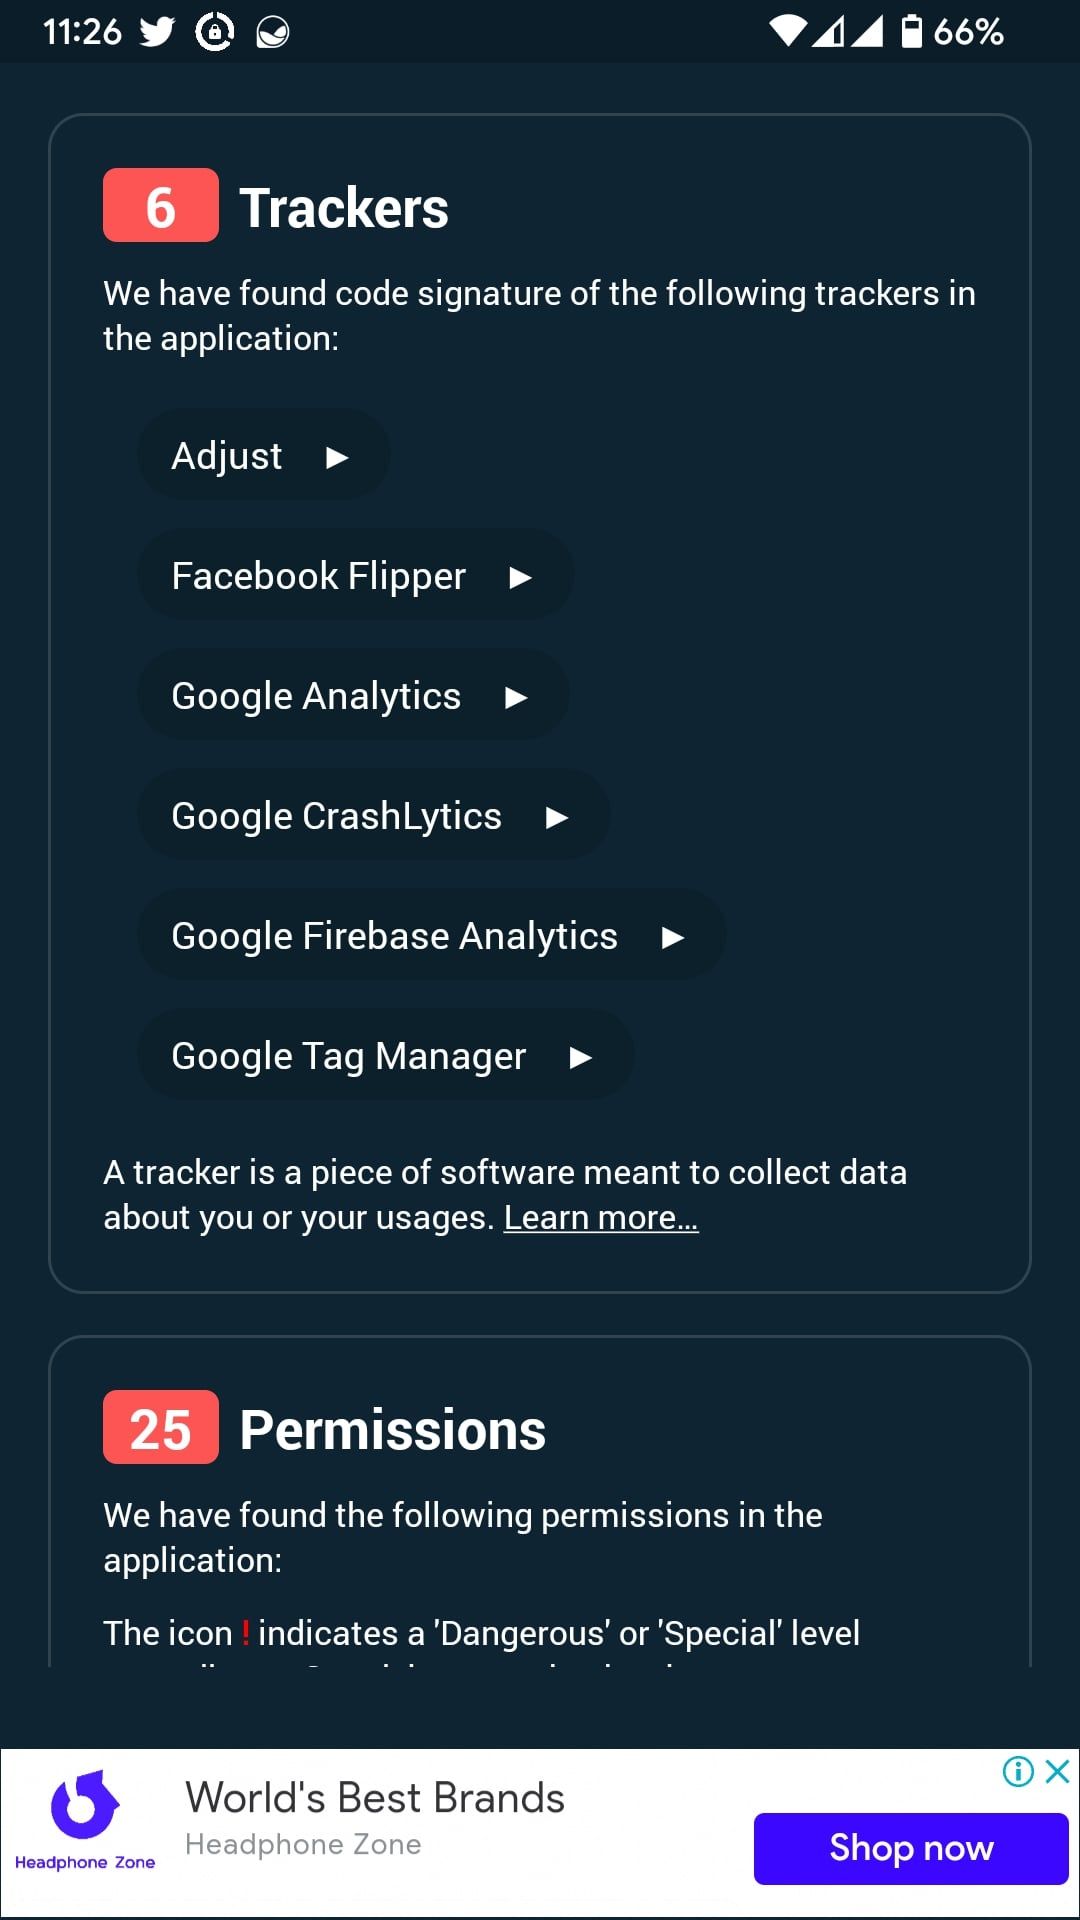 App Permission and Tracker Trackers List